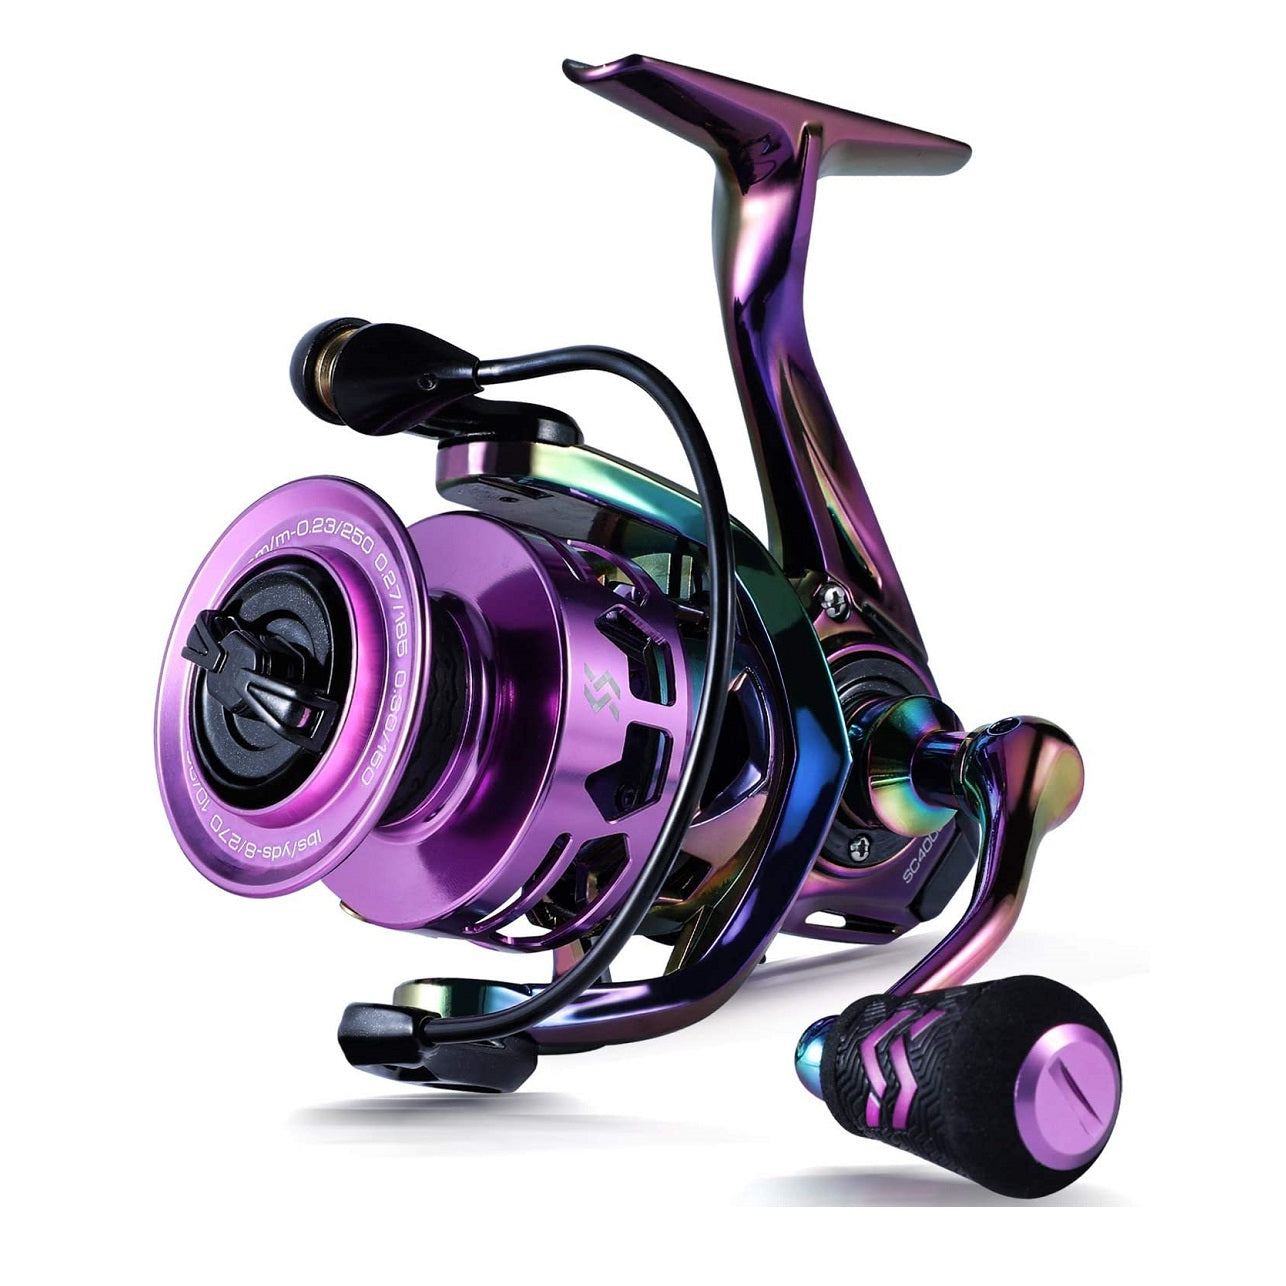 Sougayilang Fishing Reel, Colorful Ultralight Spinning Reels with Graphite  Frame 6.0:1 High Speed, Over 39 lbs Carbon Drag for Saltwater or Freshwater  Fishing